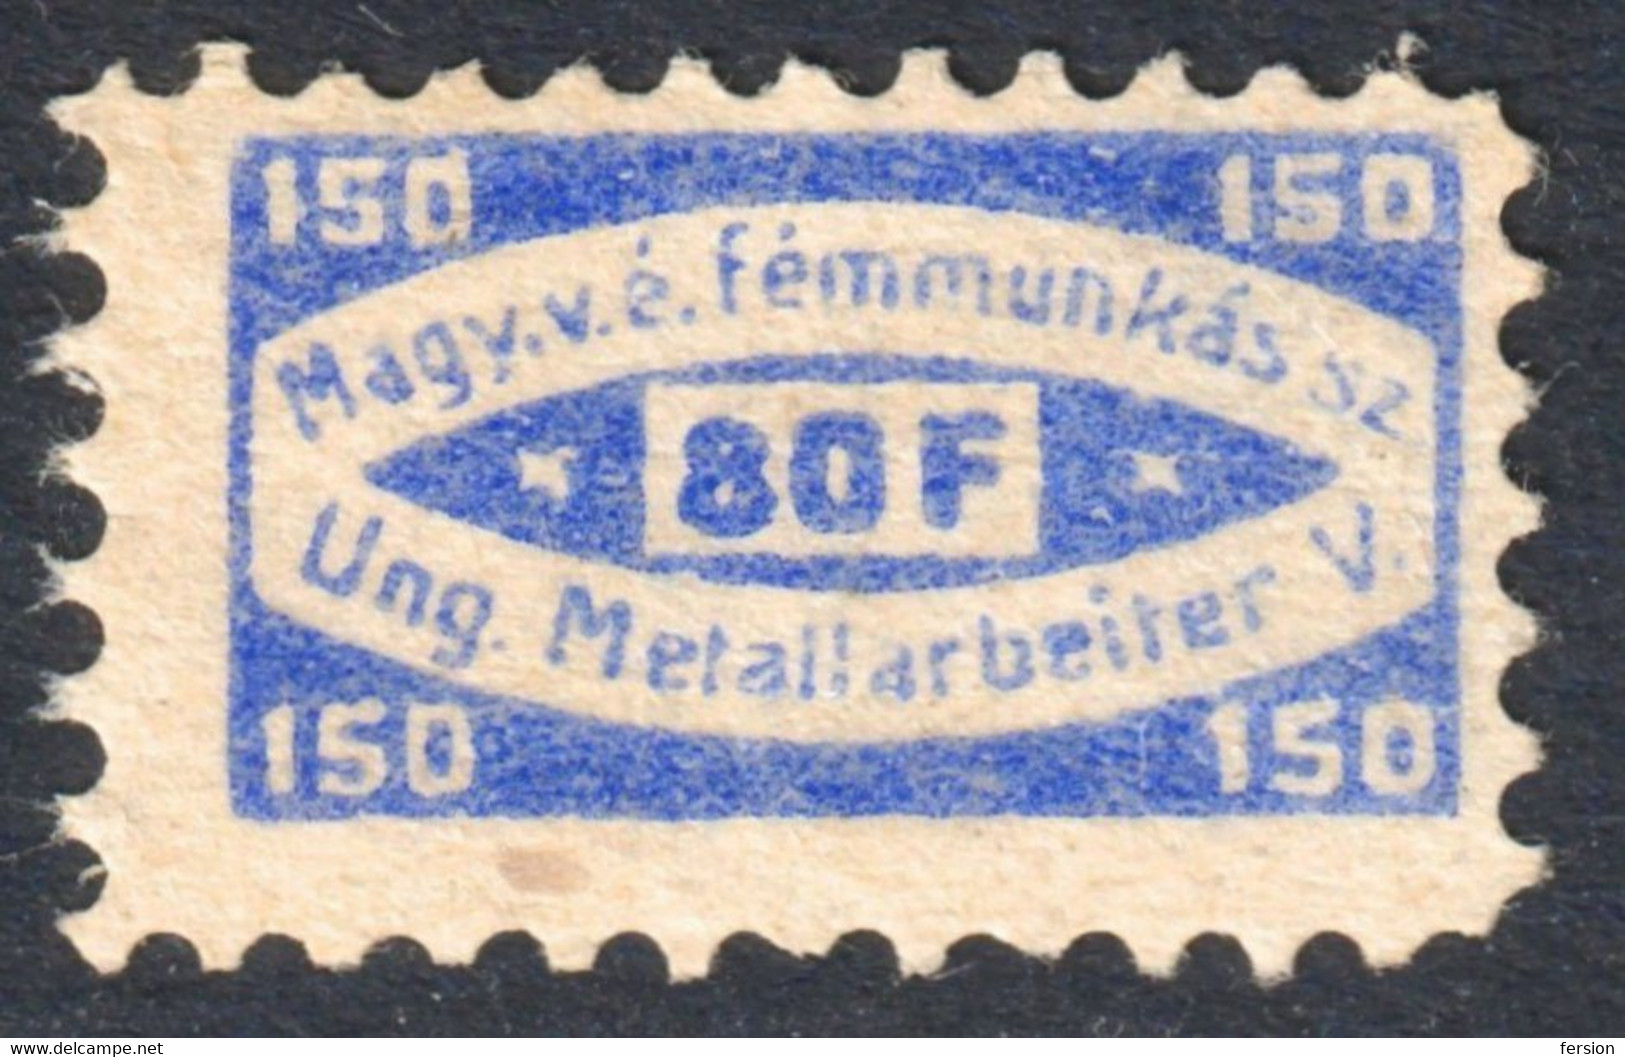 METAL INDUSTRY Factory Worker Trade Labour Union Hungary 1910's Charity Tax LABEL VIGNETTE CINDERELLA Germany - Officials